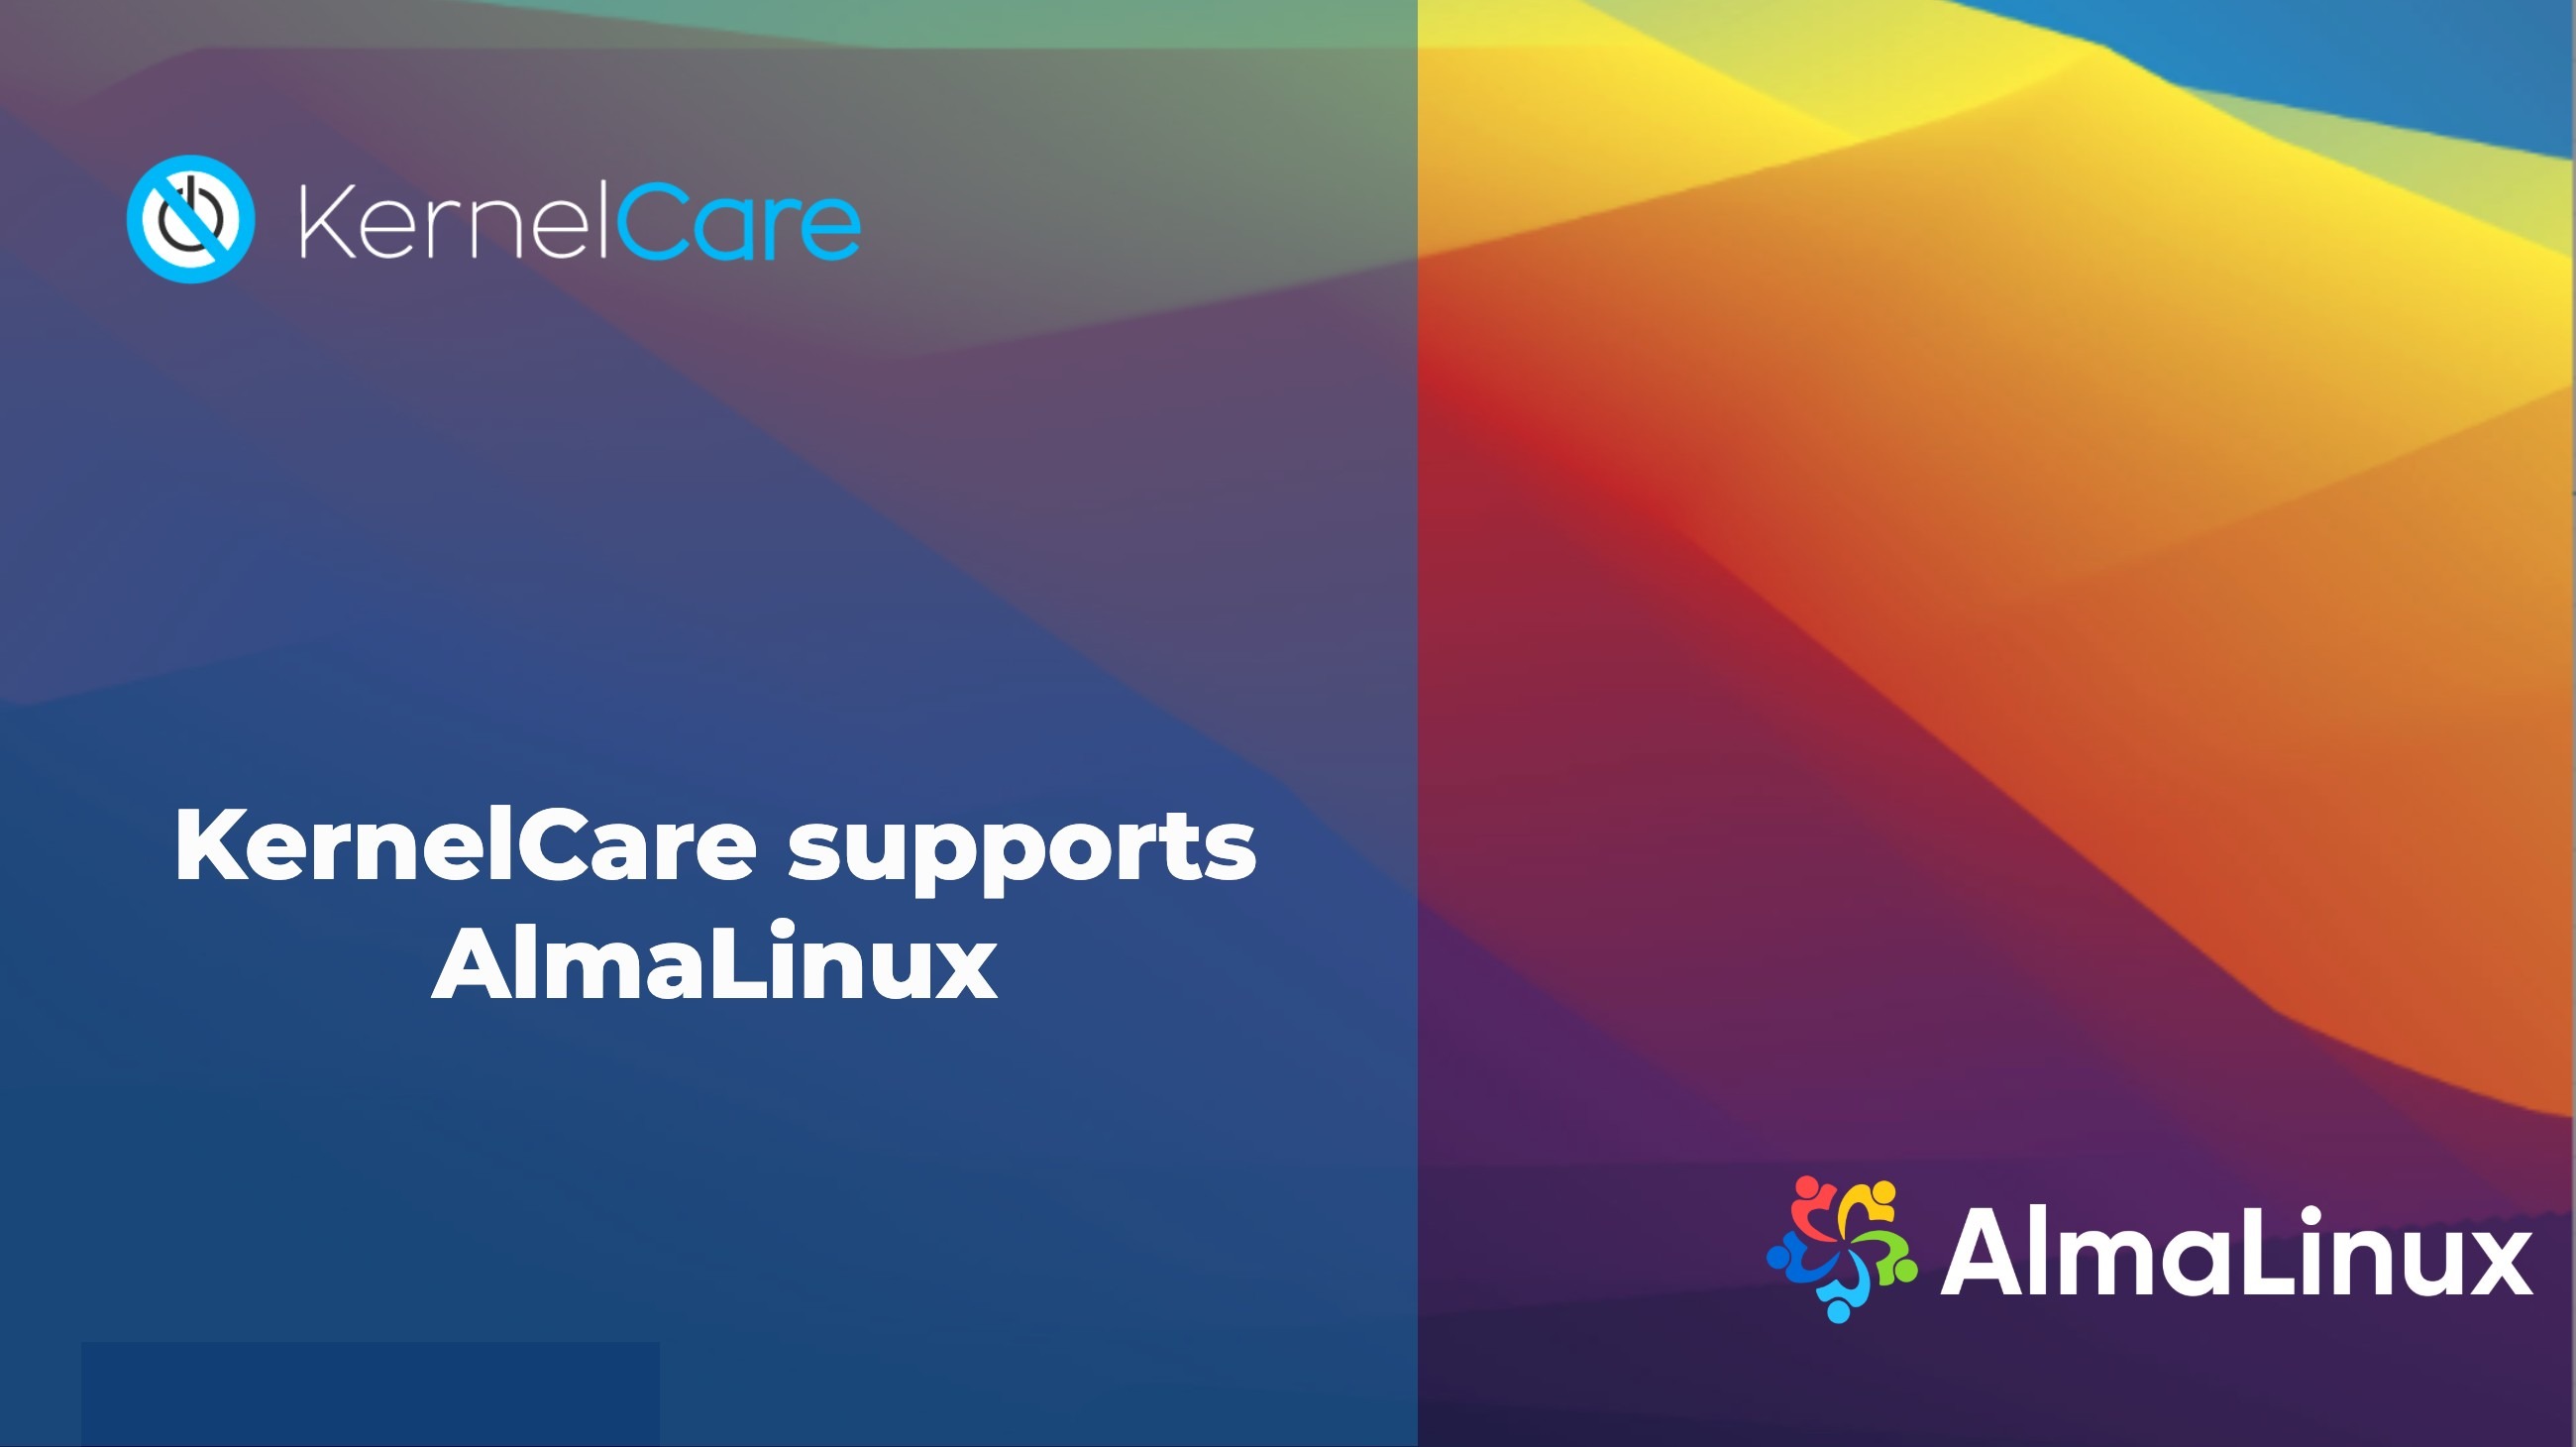 KernelCare supports AlmaLinux OS